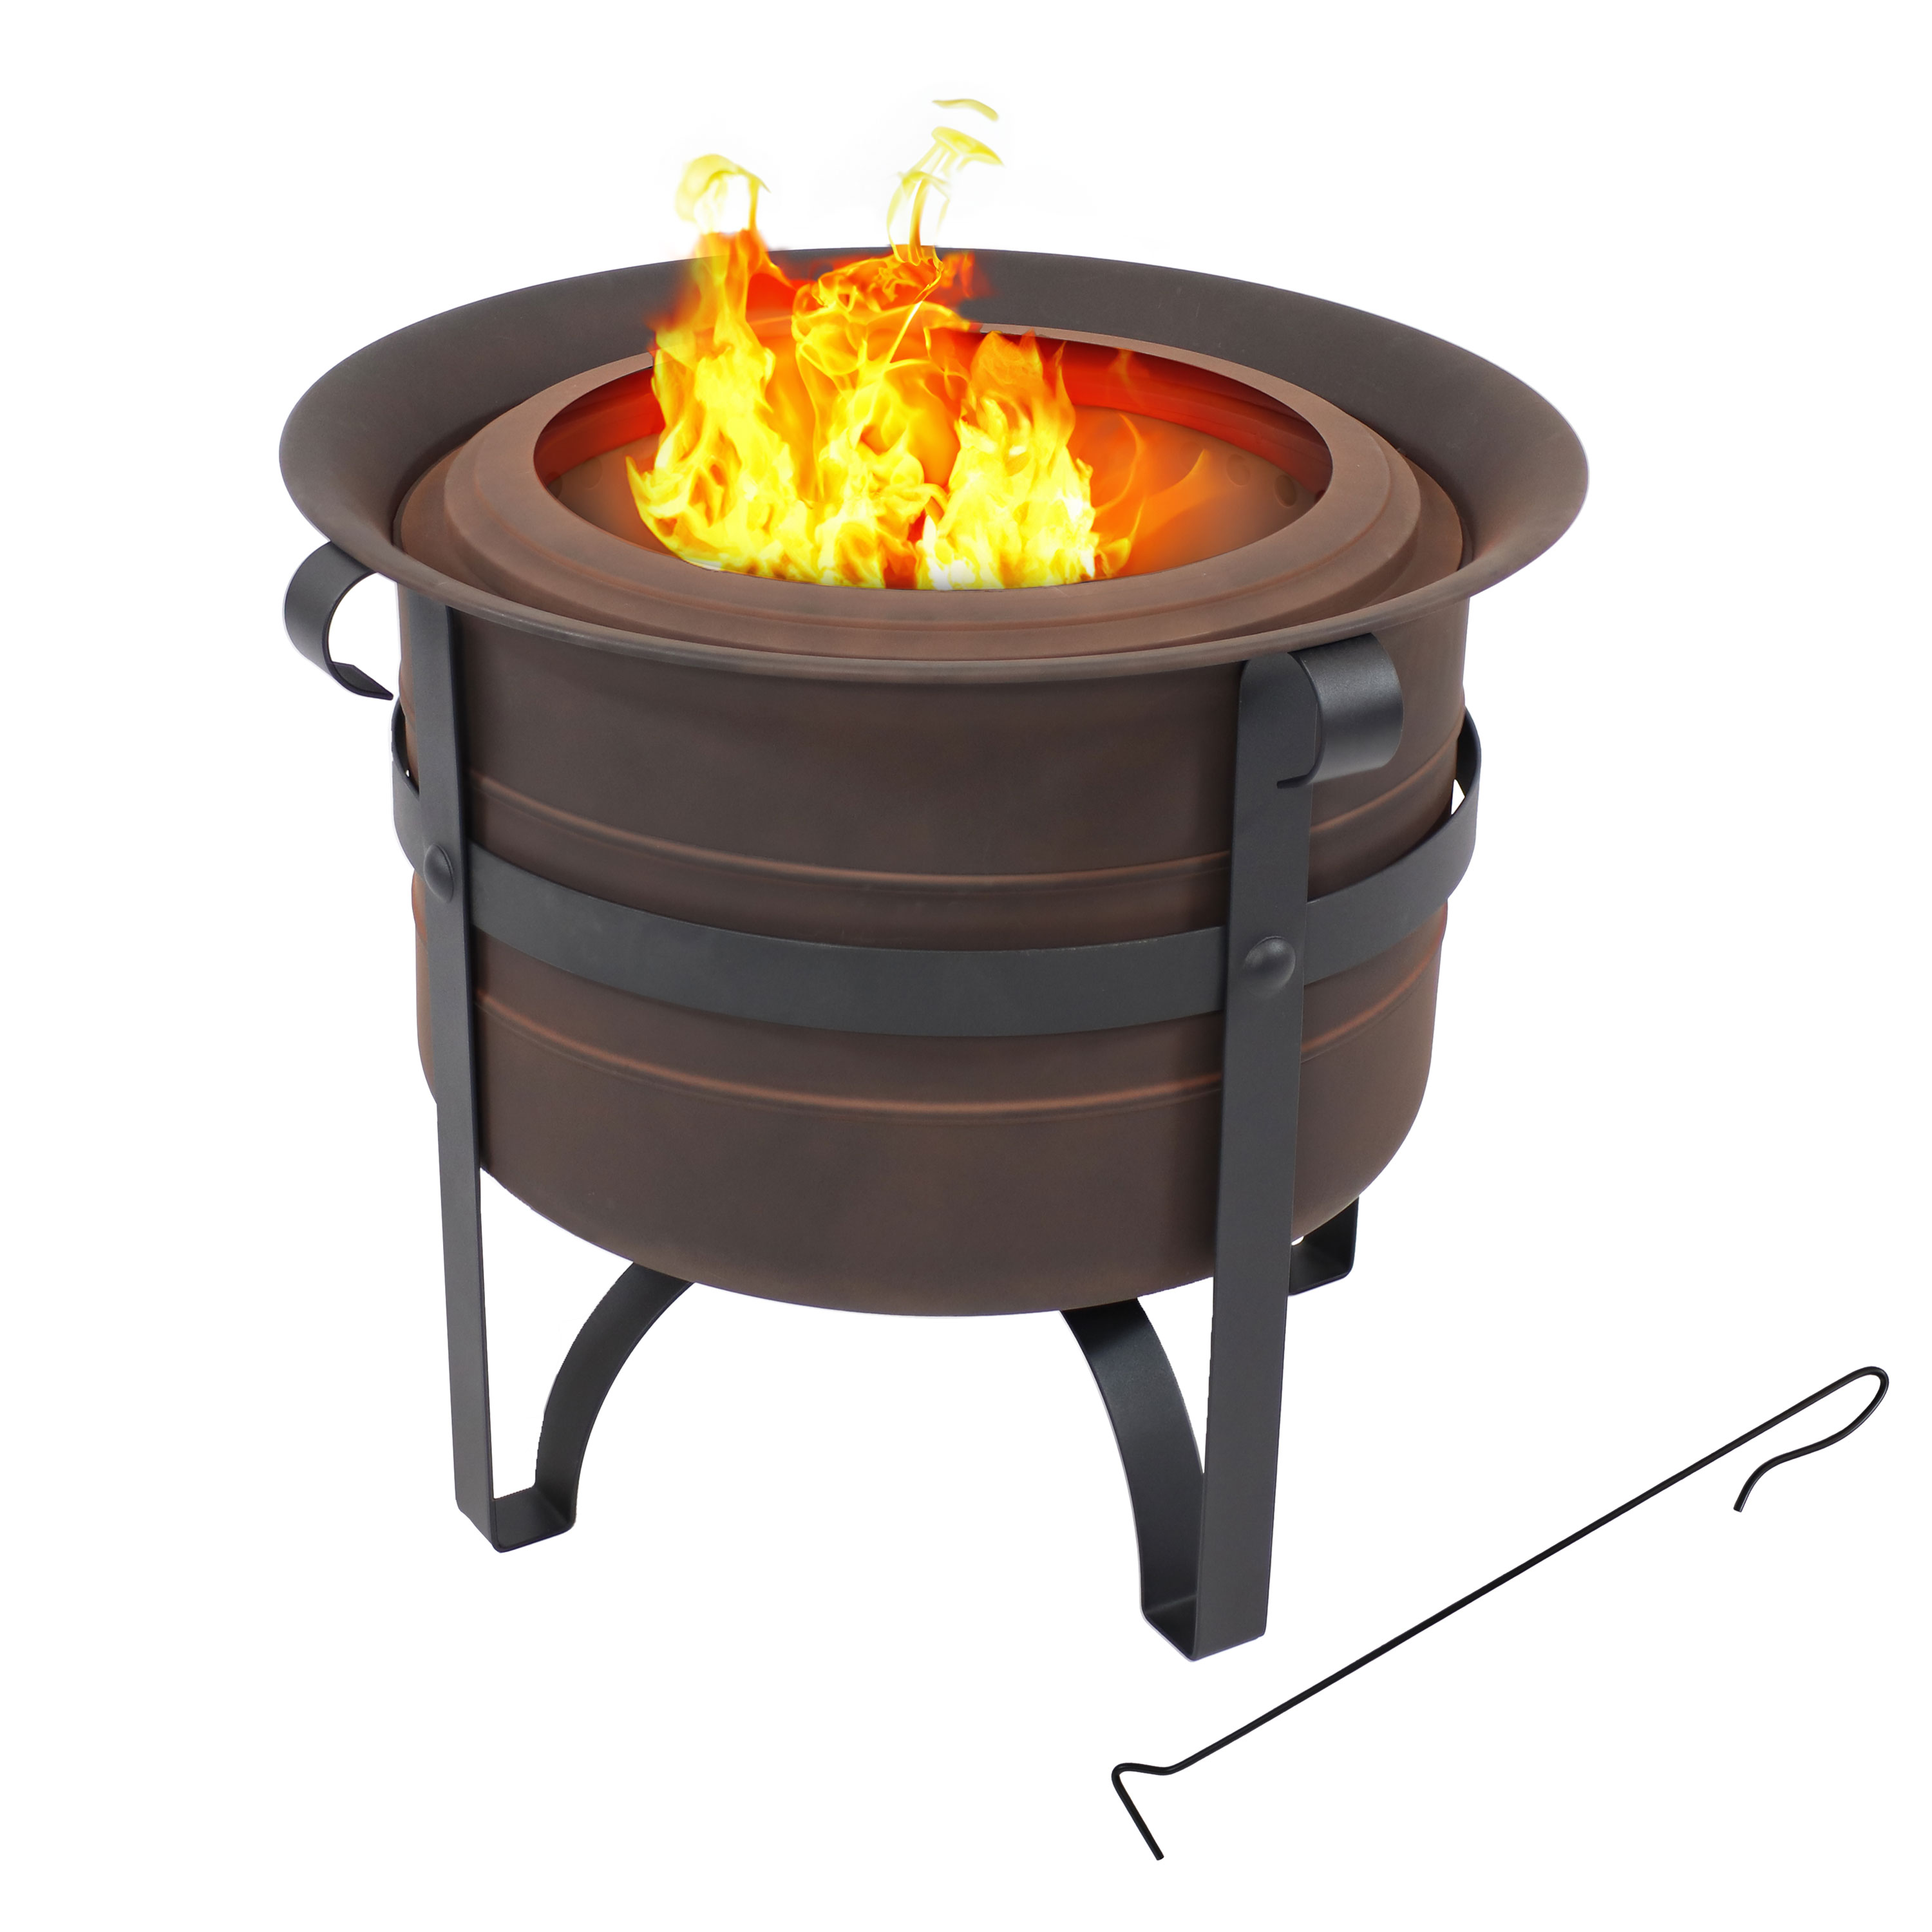 Steel Cauldron-Style Smokeless Fire Pit with Poker